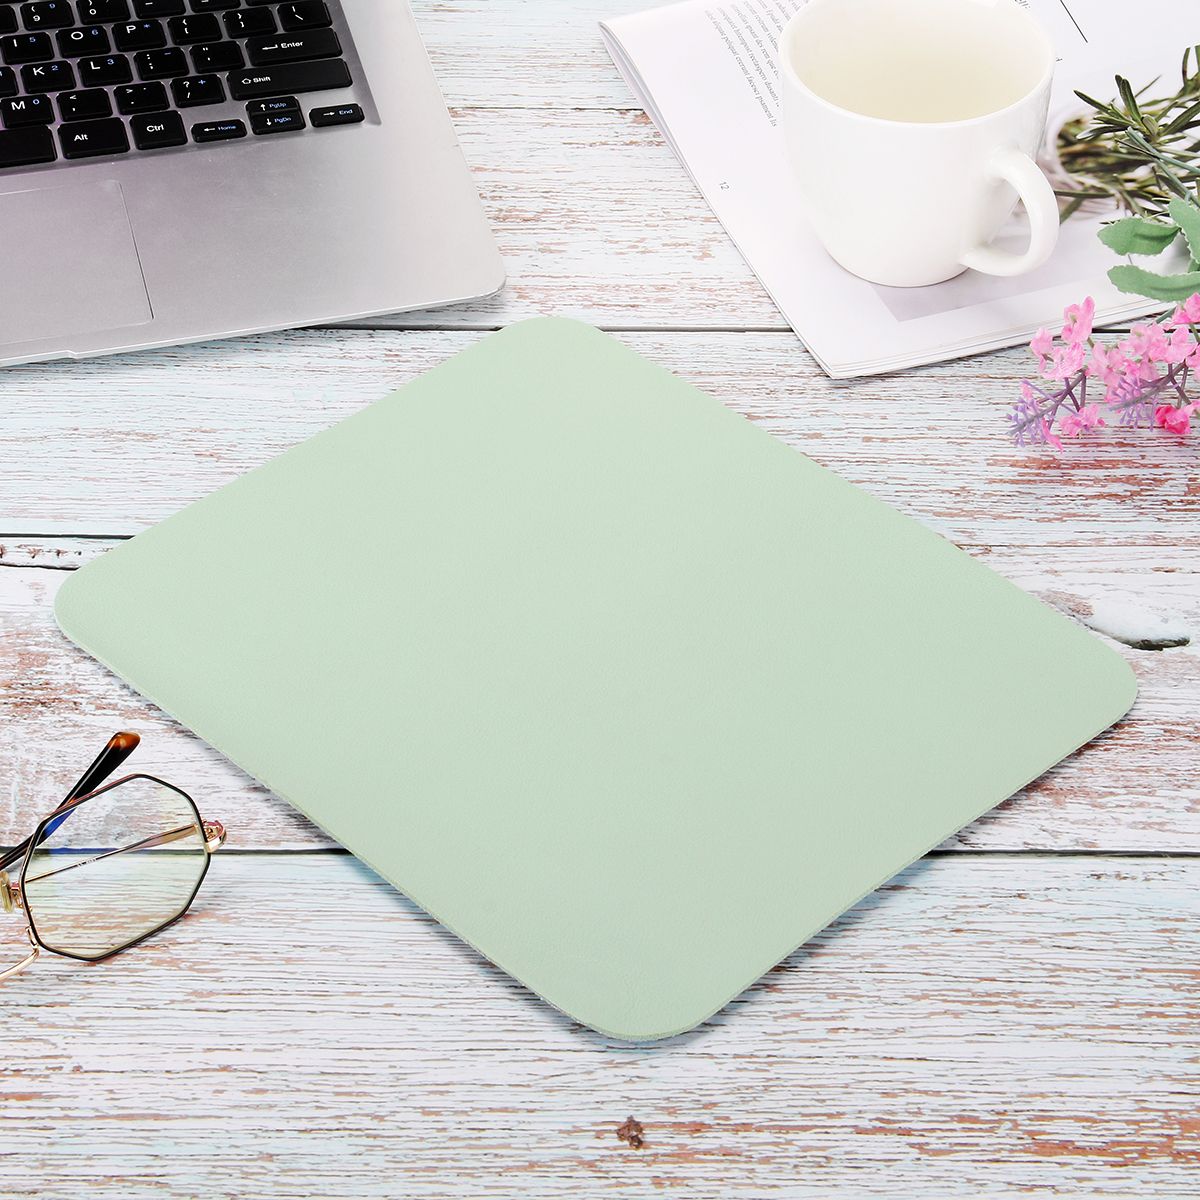 Waterproof-Mouse-Pad-Office-Gaming-Desk-Mat-Single-Side-Multi-colored-PU-Leather-PVC-Pad-for-Mouse-K-1749963